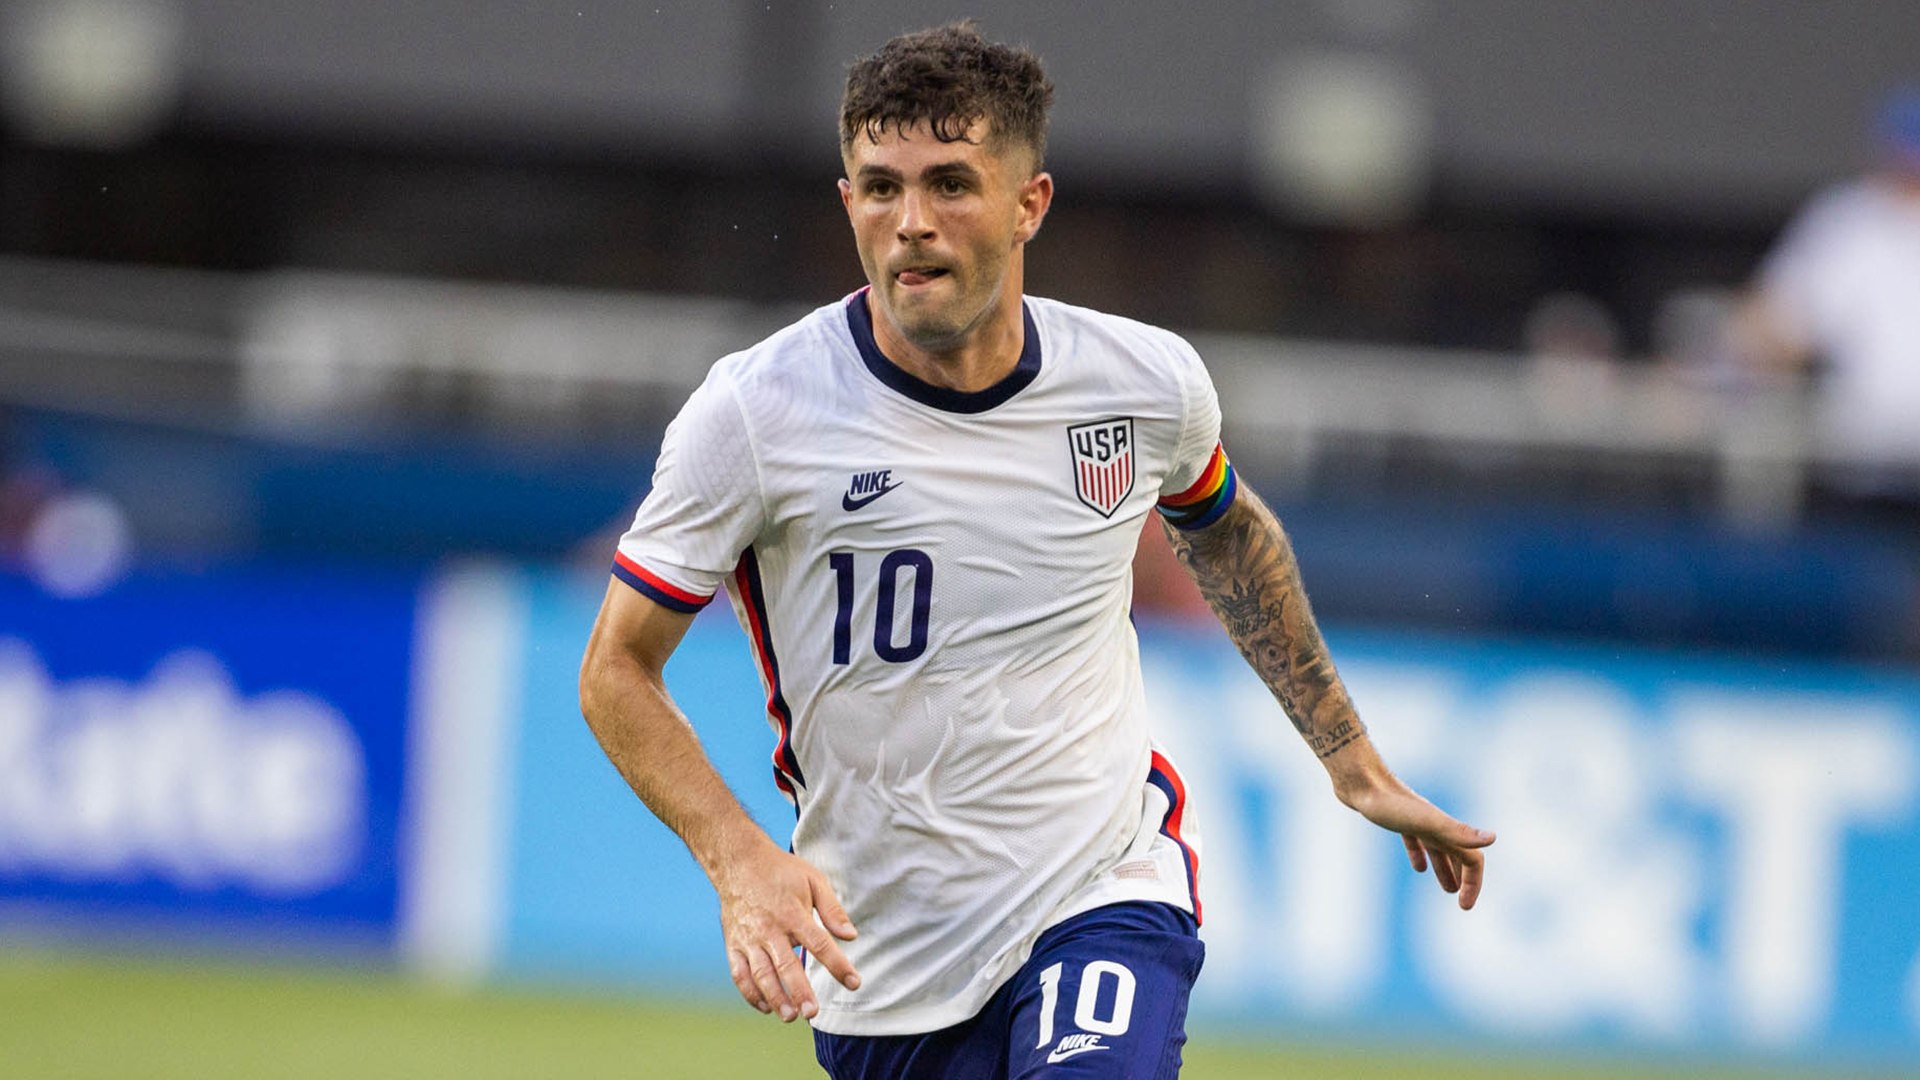 Pulisic tip to join Newcastle United as £58m World Cup hero set to leave Stamford Bridge